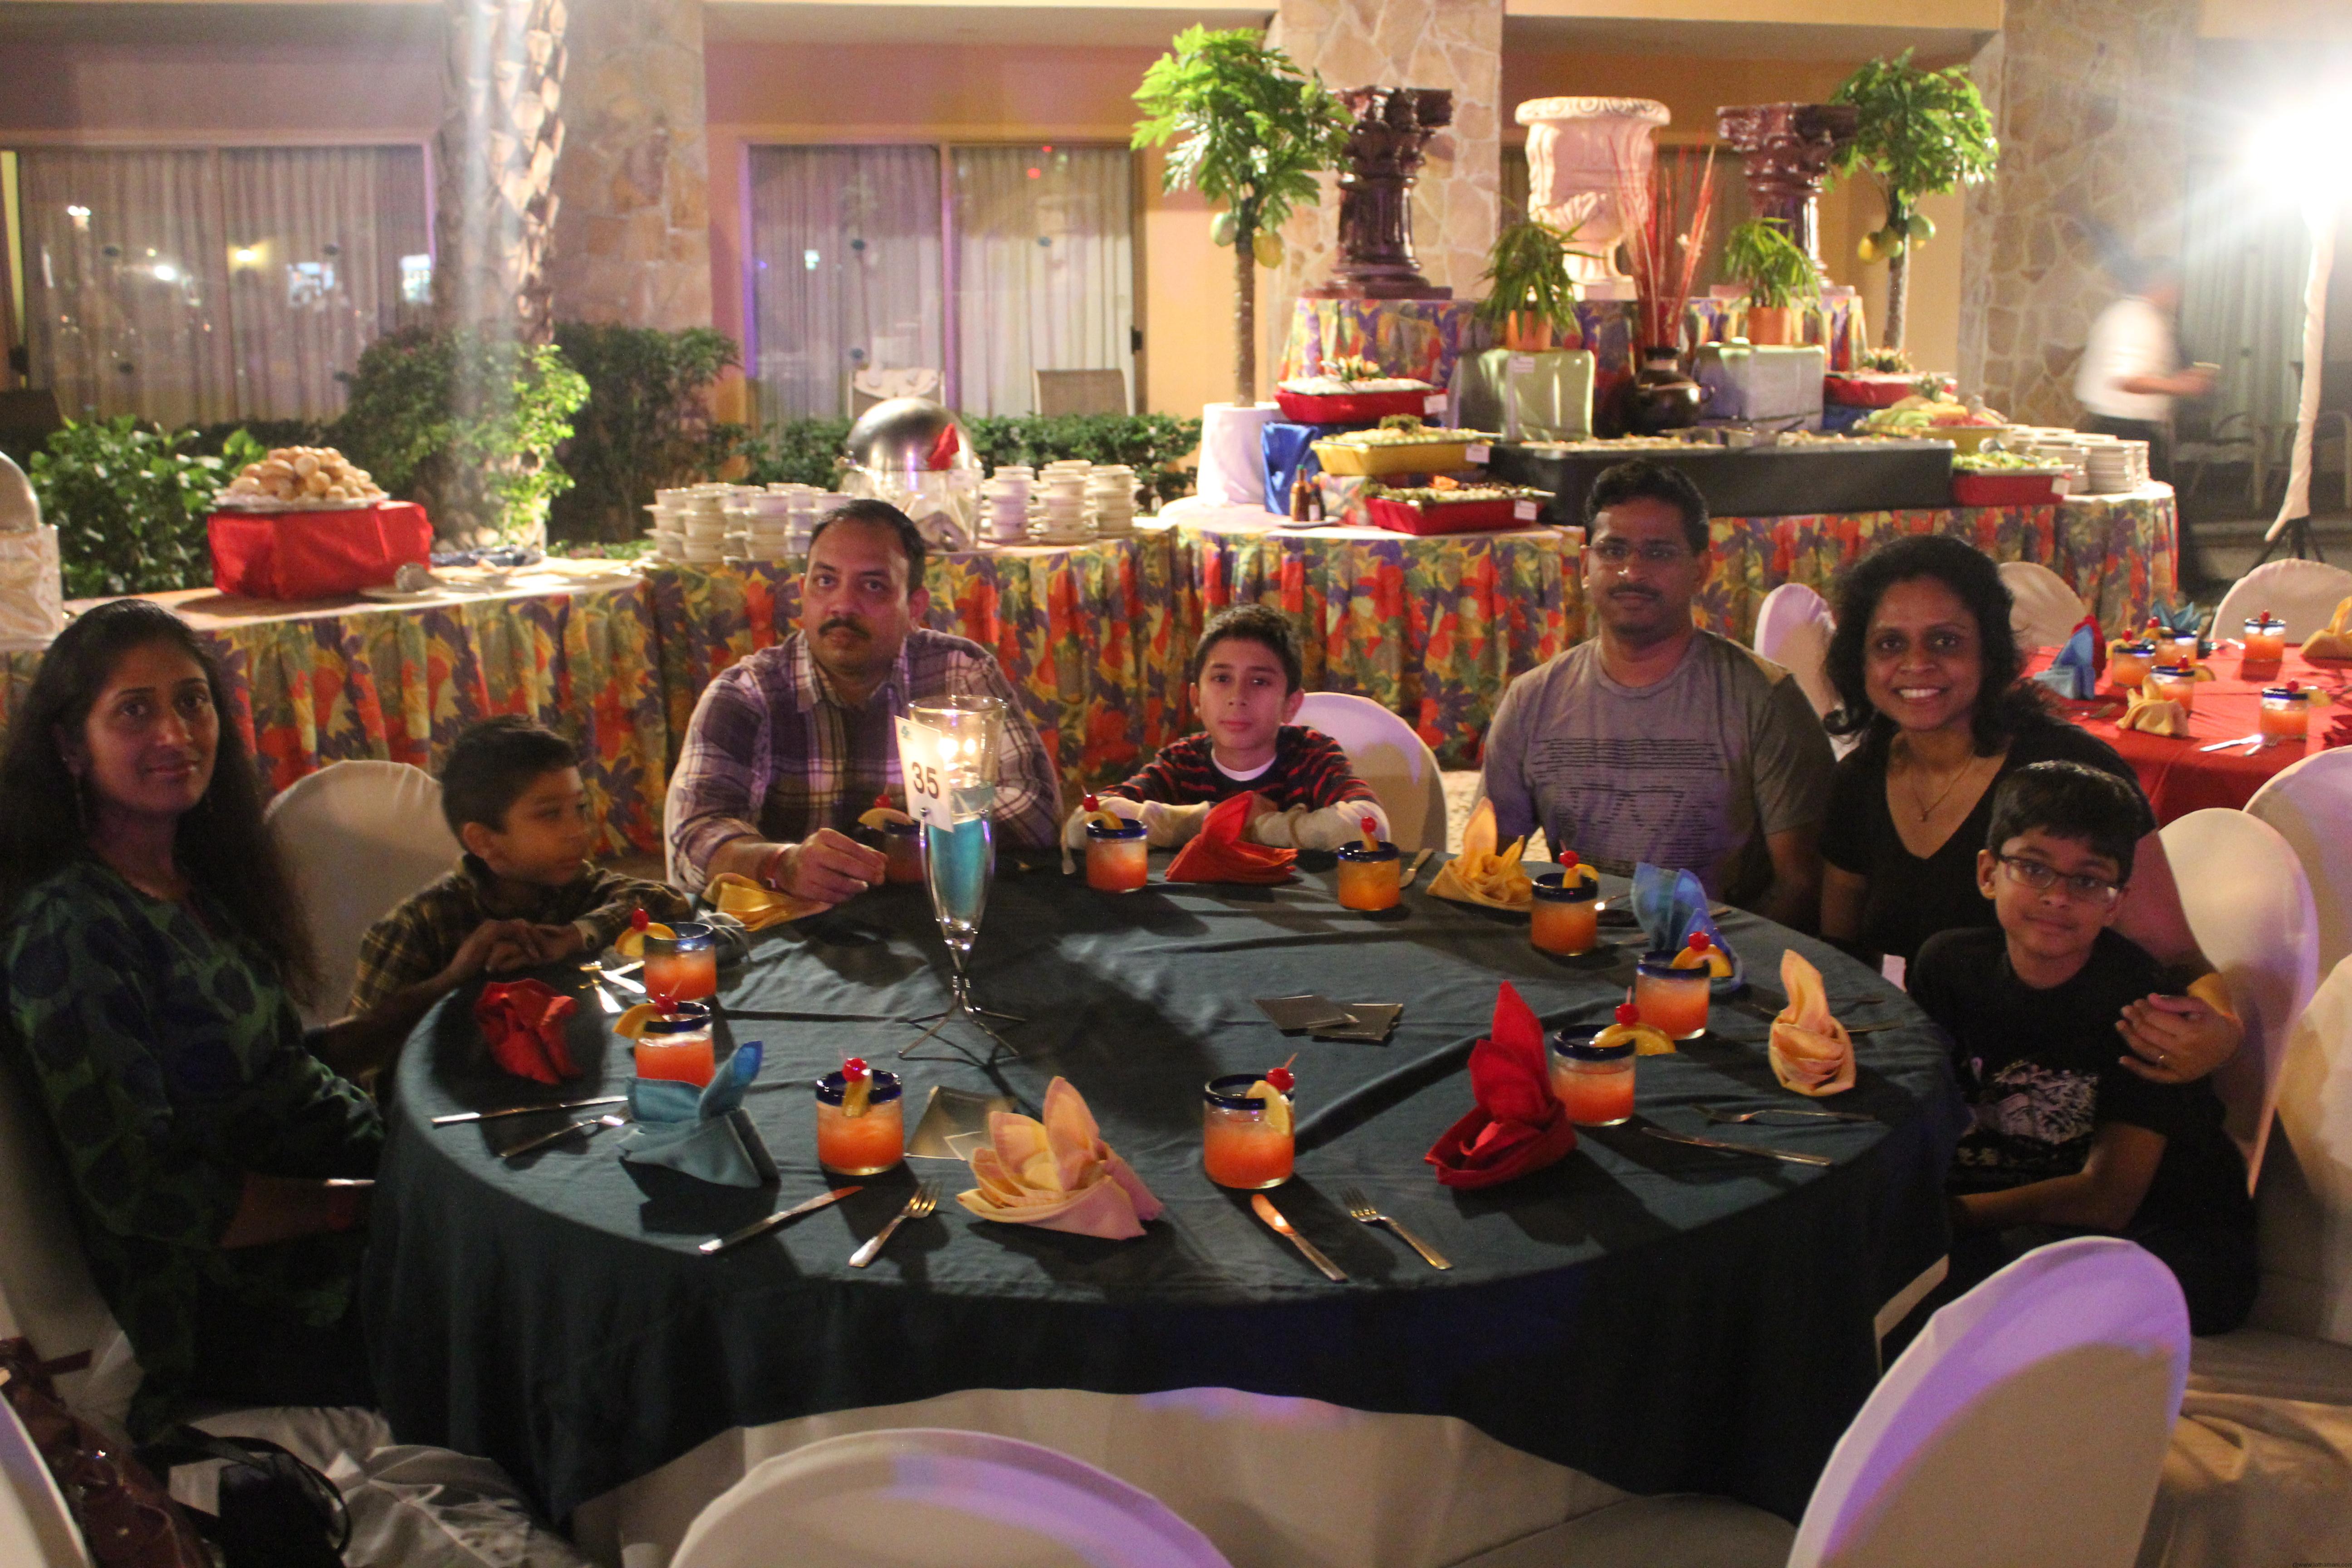 Family Dinner during the Caribbean party